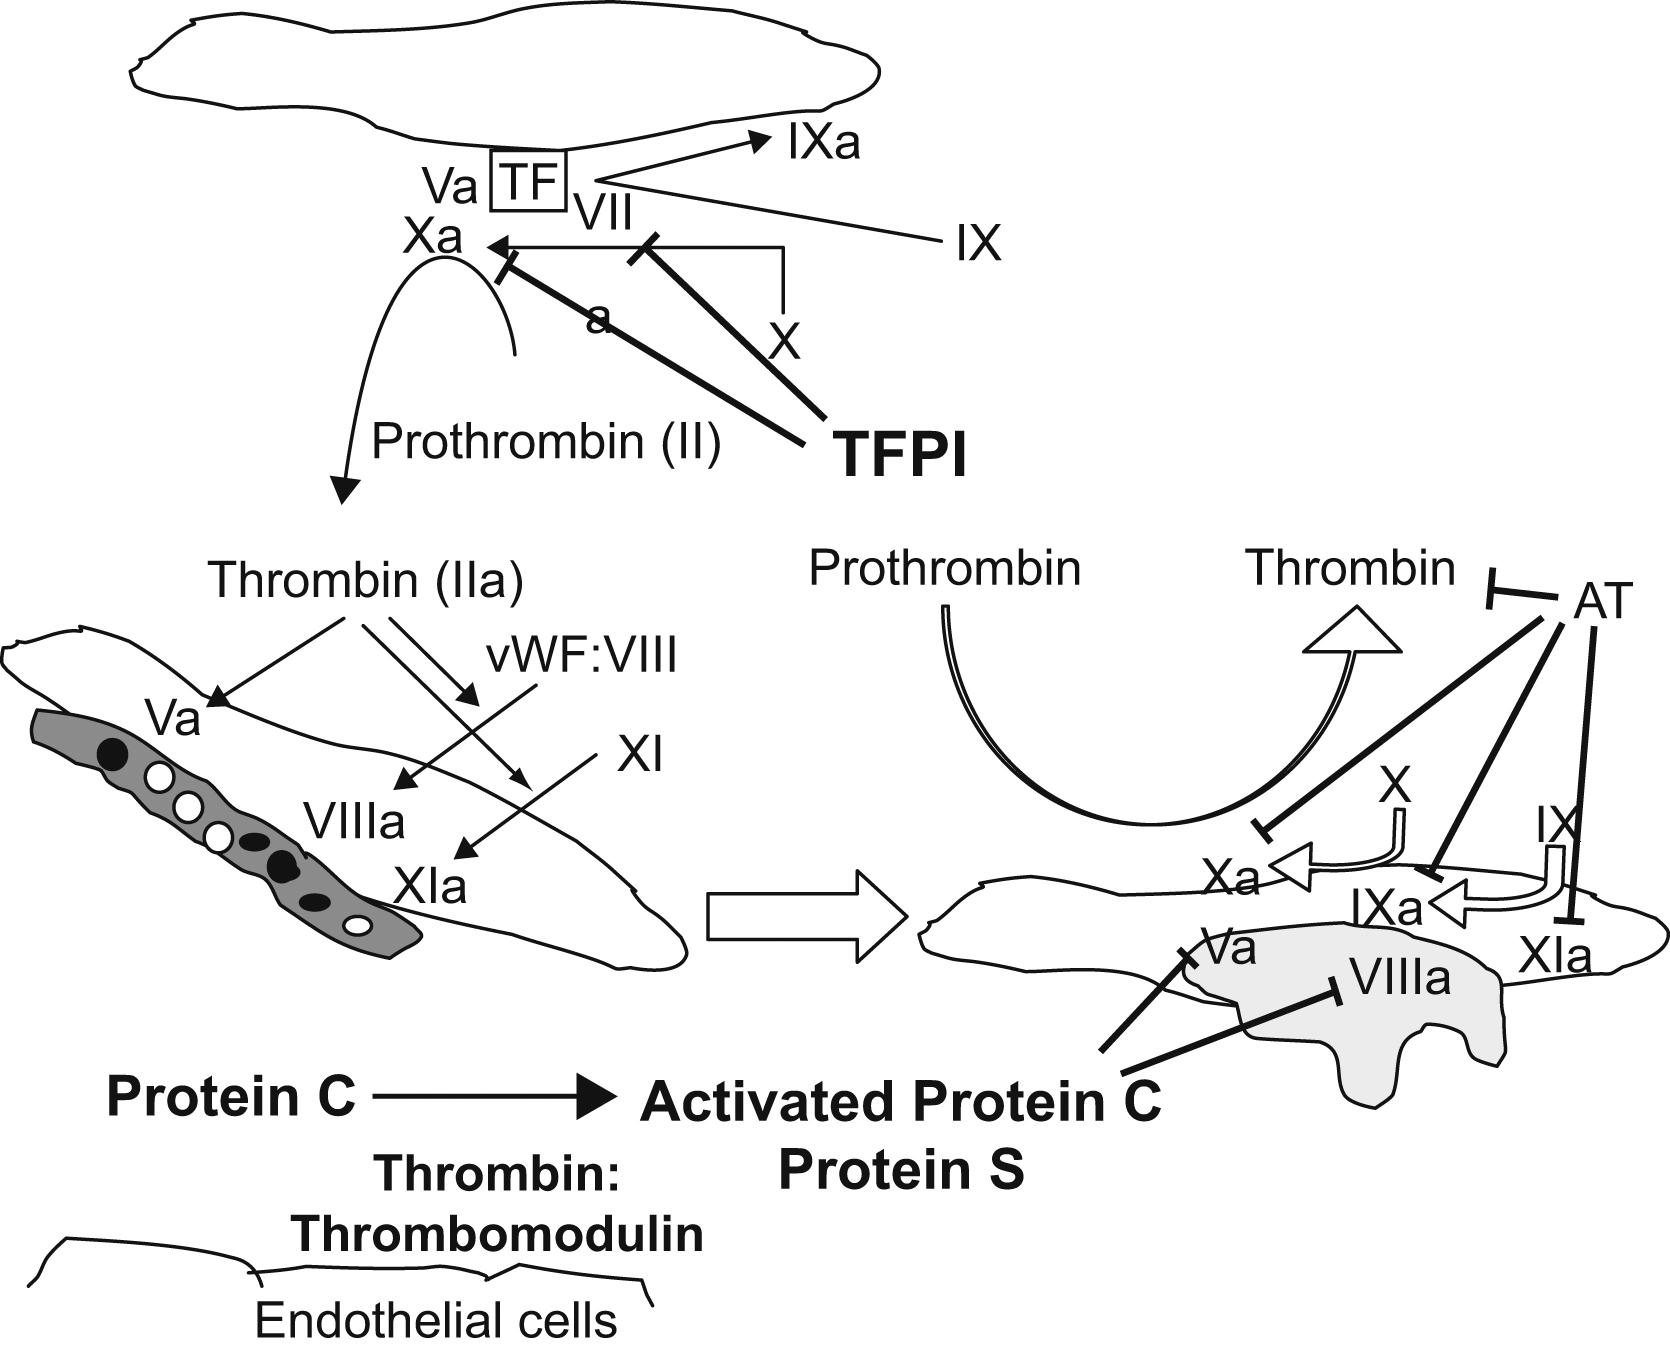 Figure 13.3, Major inhibitory proteins of coagulation. TFPI, AT, protein C and protein S are depicted with their target coagulation factor substrates. Abbreviations: TFPI , tissue factor pathway inhibitor; AT , antithrombin. (T=inhibition).